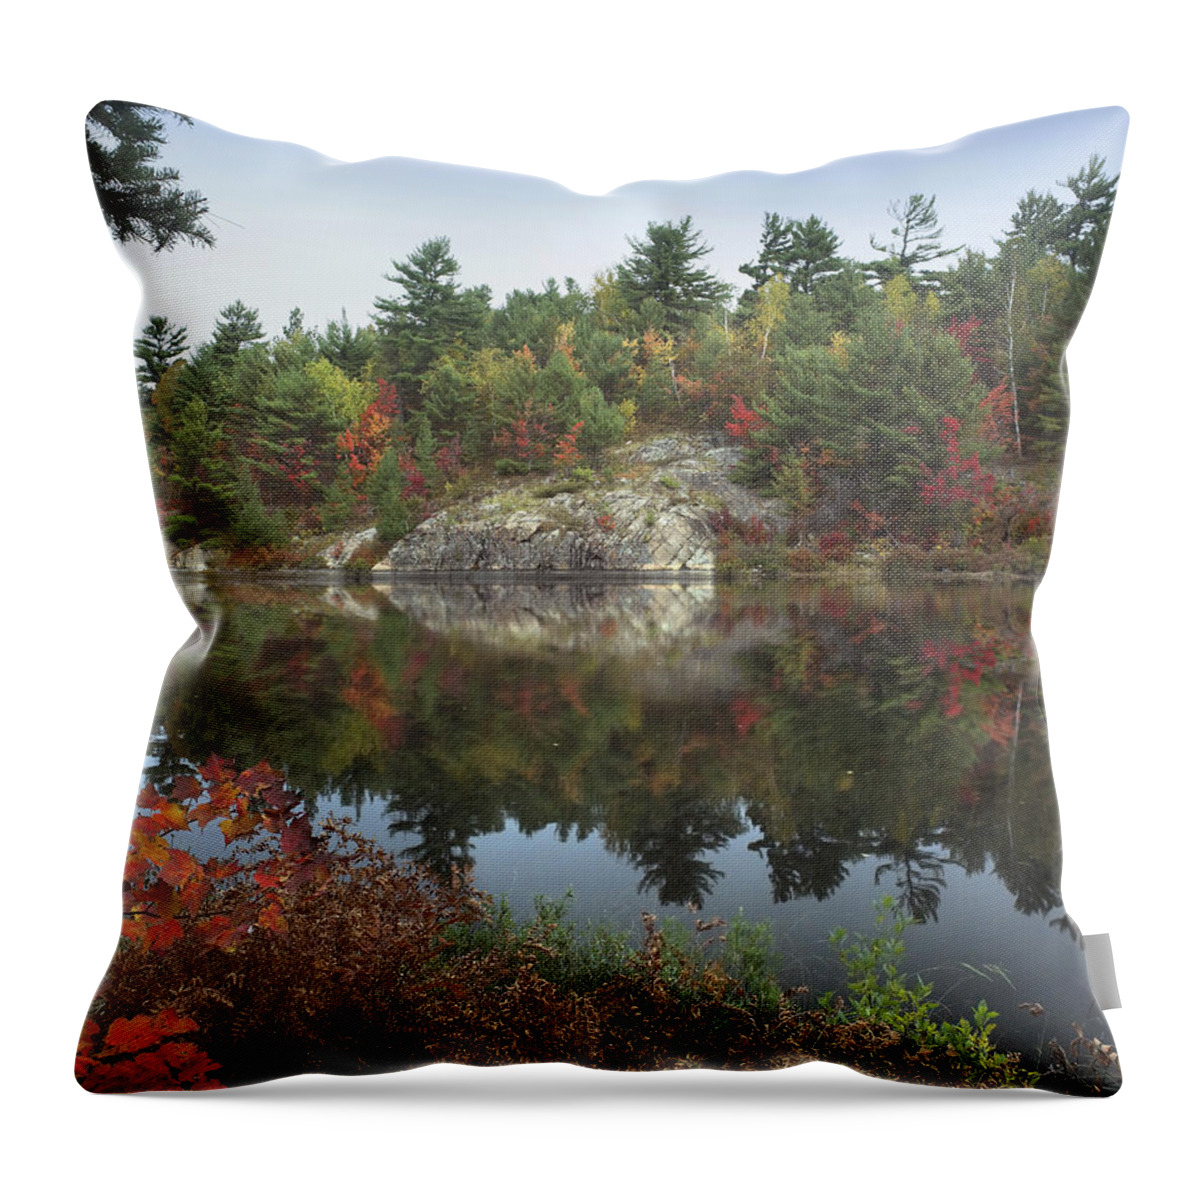 Feb0514 Throw Pillow featuring the photograph Lake Near French River Ontario Canada by Tim Fitzharris